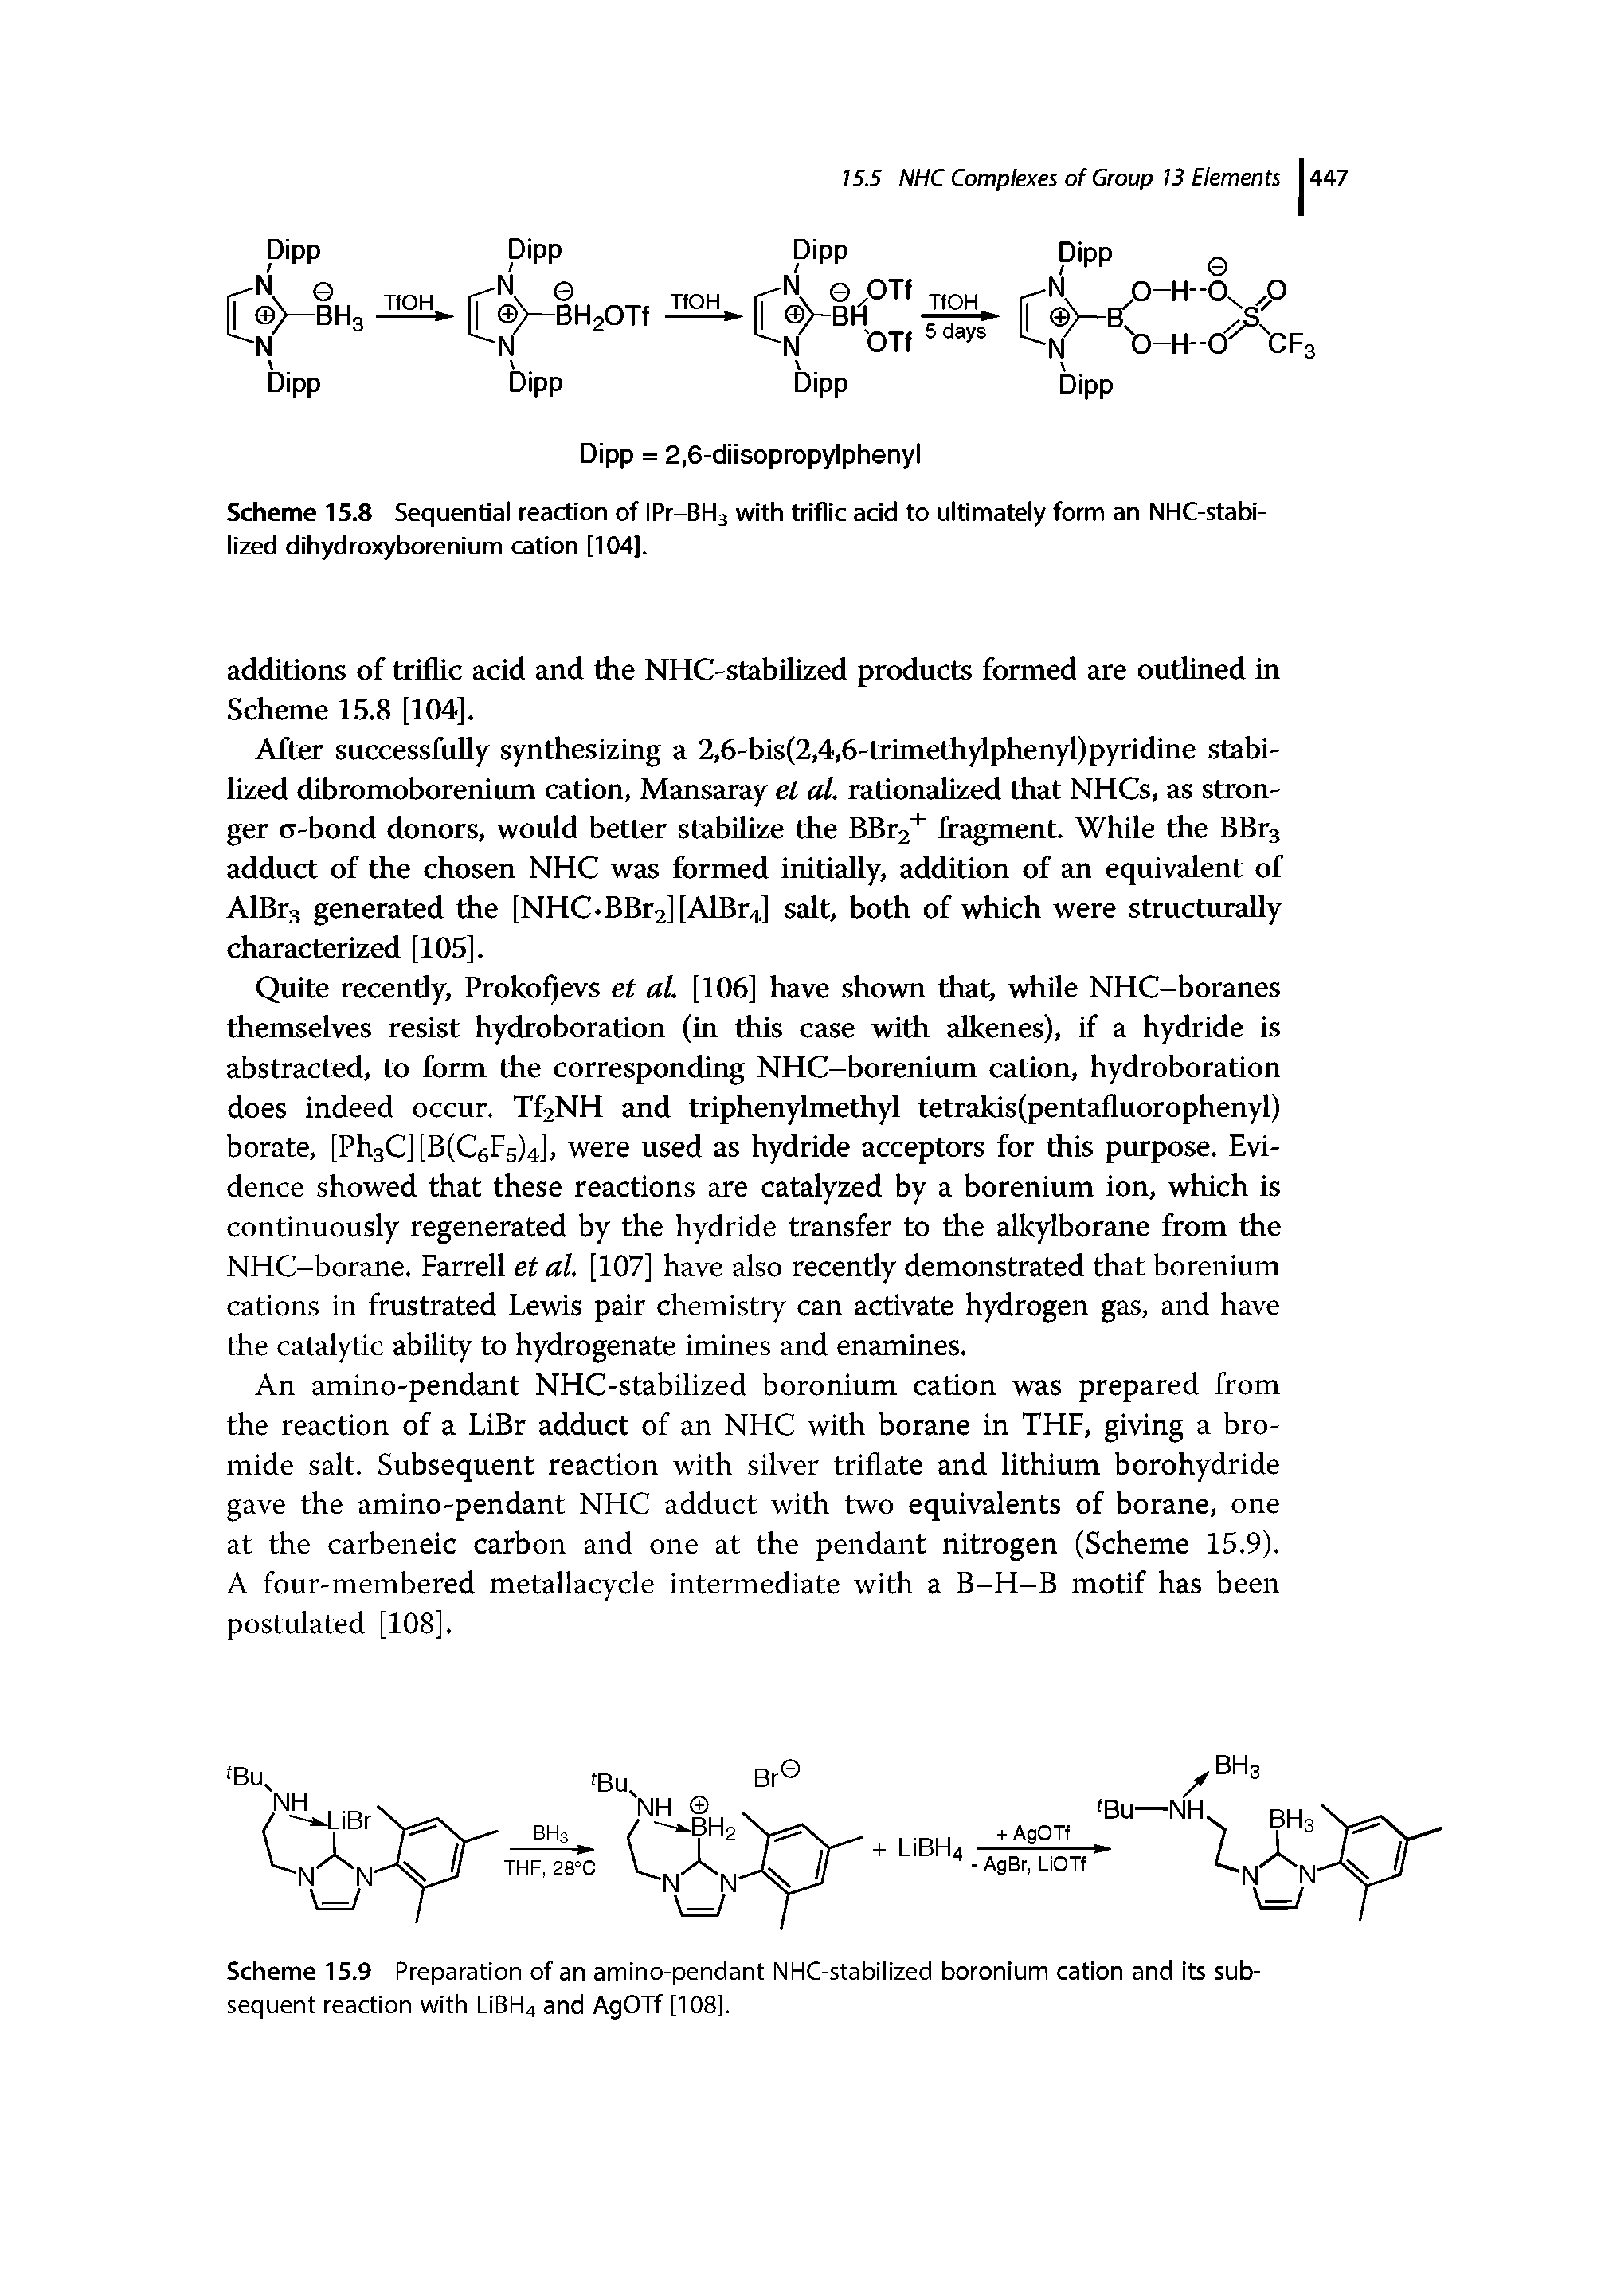 Scheme 15.9 Preparation of an amino-pendant NHC-stabiiized boronium cation and its subsequent reaction with LiBH4 and AgOTf [108].